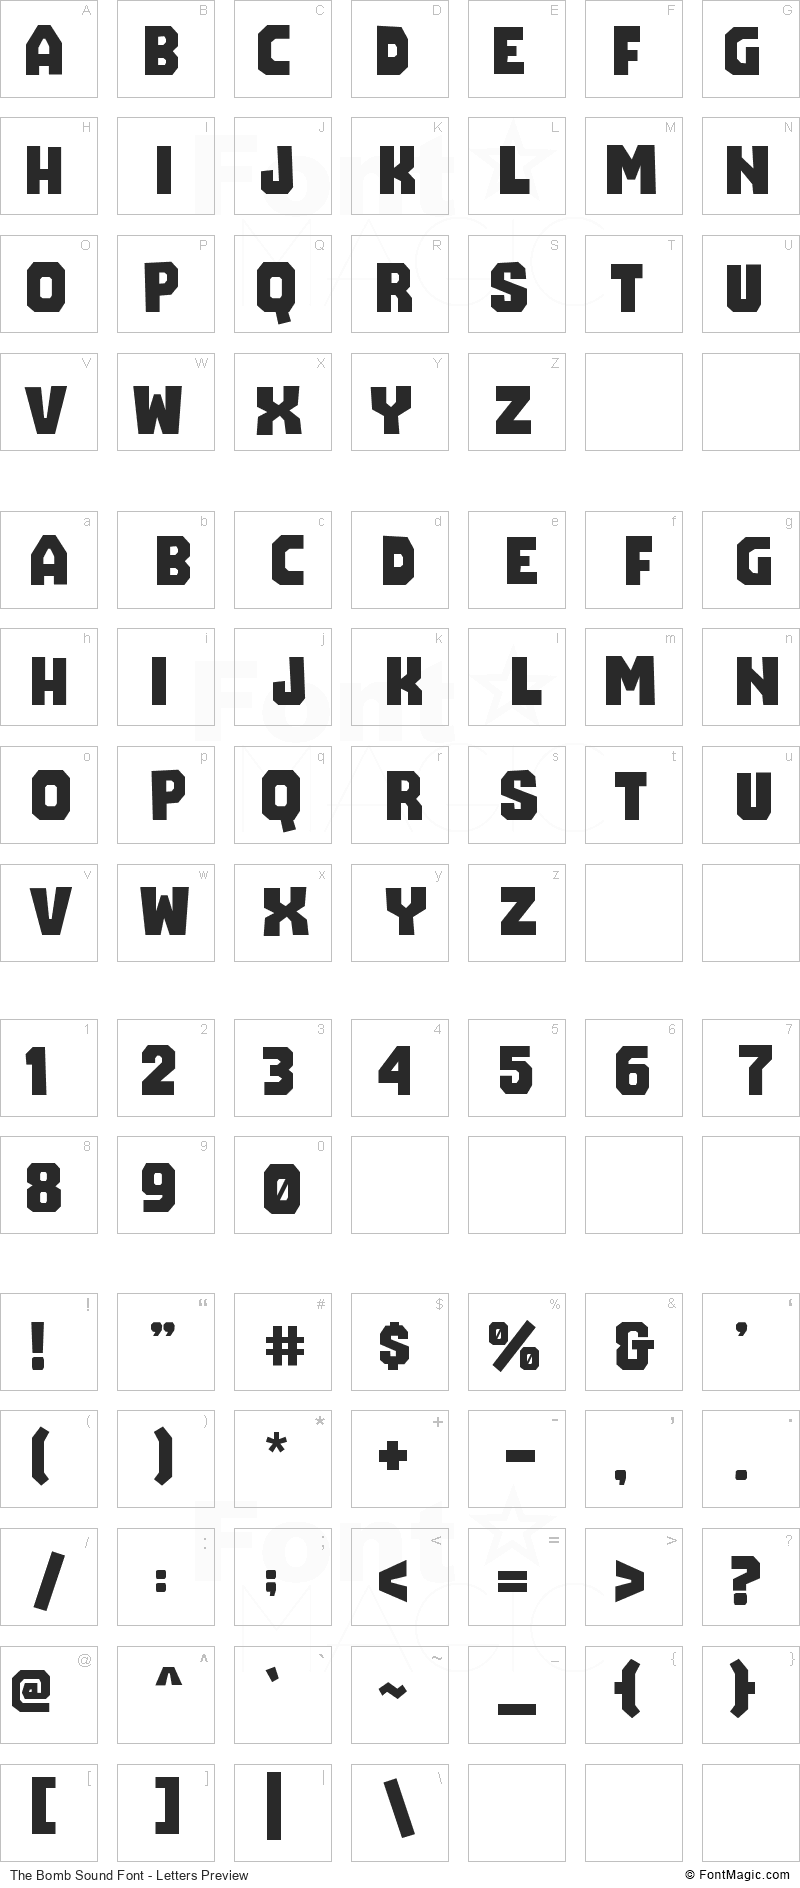 The Bomb Sound Font - All Latters Preview Chart